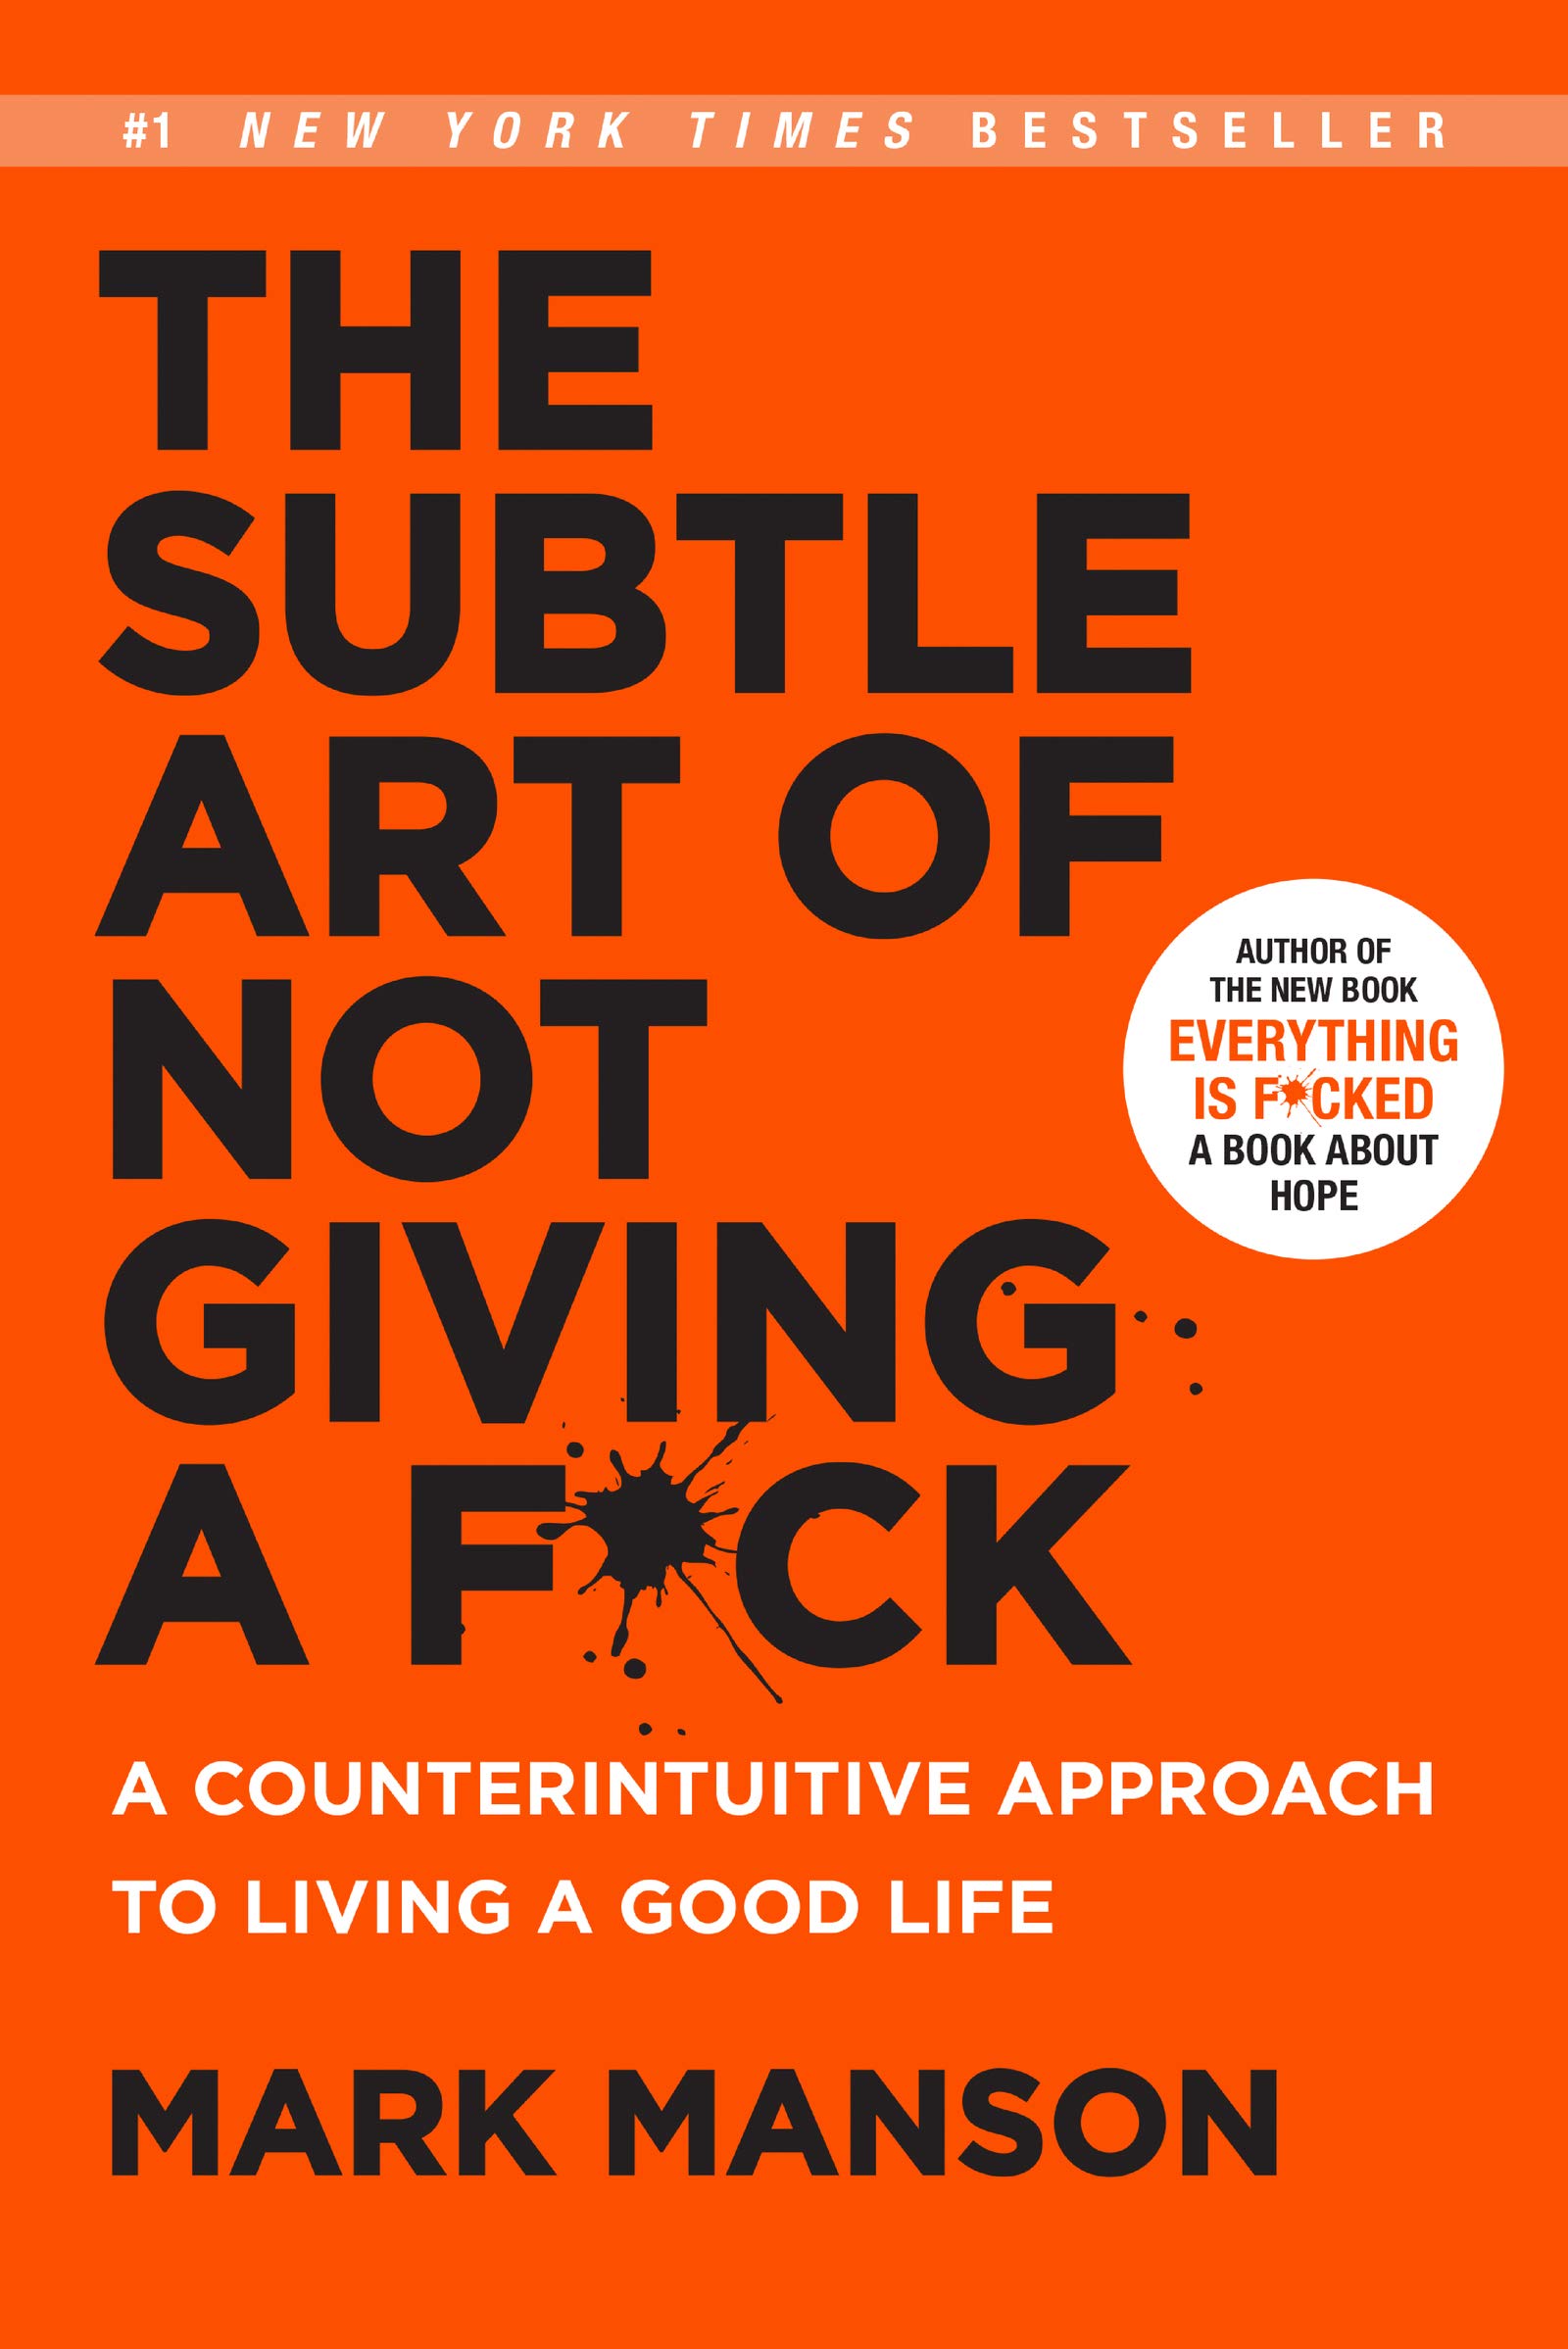 The Subtle Art of Not Giving a Fxck: A Counterintuitive Approach to Living a Good Life